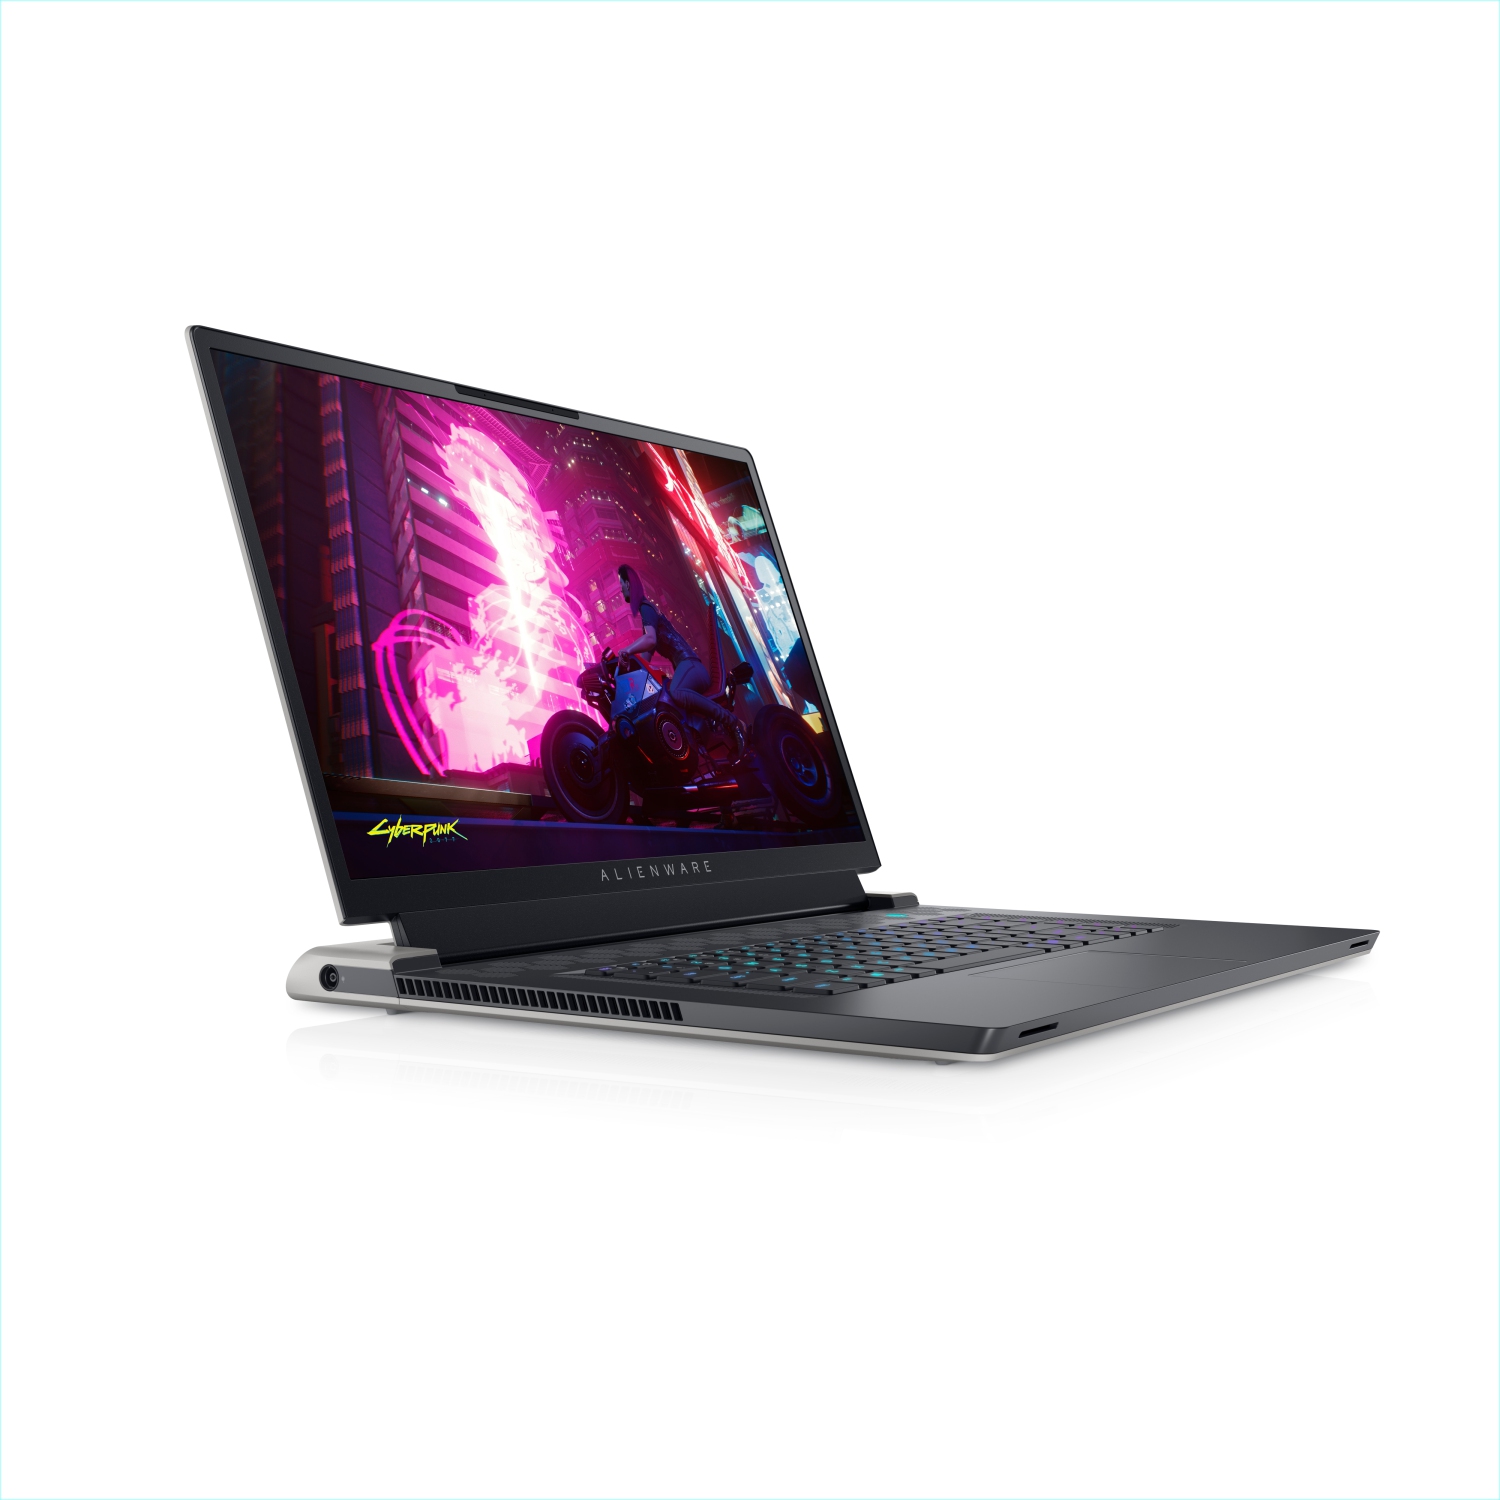 Refurbished (Excellent) - Dell Alienware X17 R1 Gaming Laptop (2021), 17.3" FHD, Core i7, 1TB SSD + 512GB SSD, 32GB RAM, RTX 3060, 4.6 GHz, 11th Gen CPU Certified